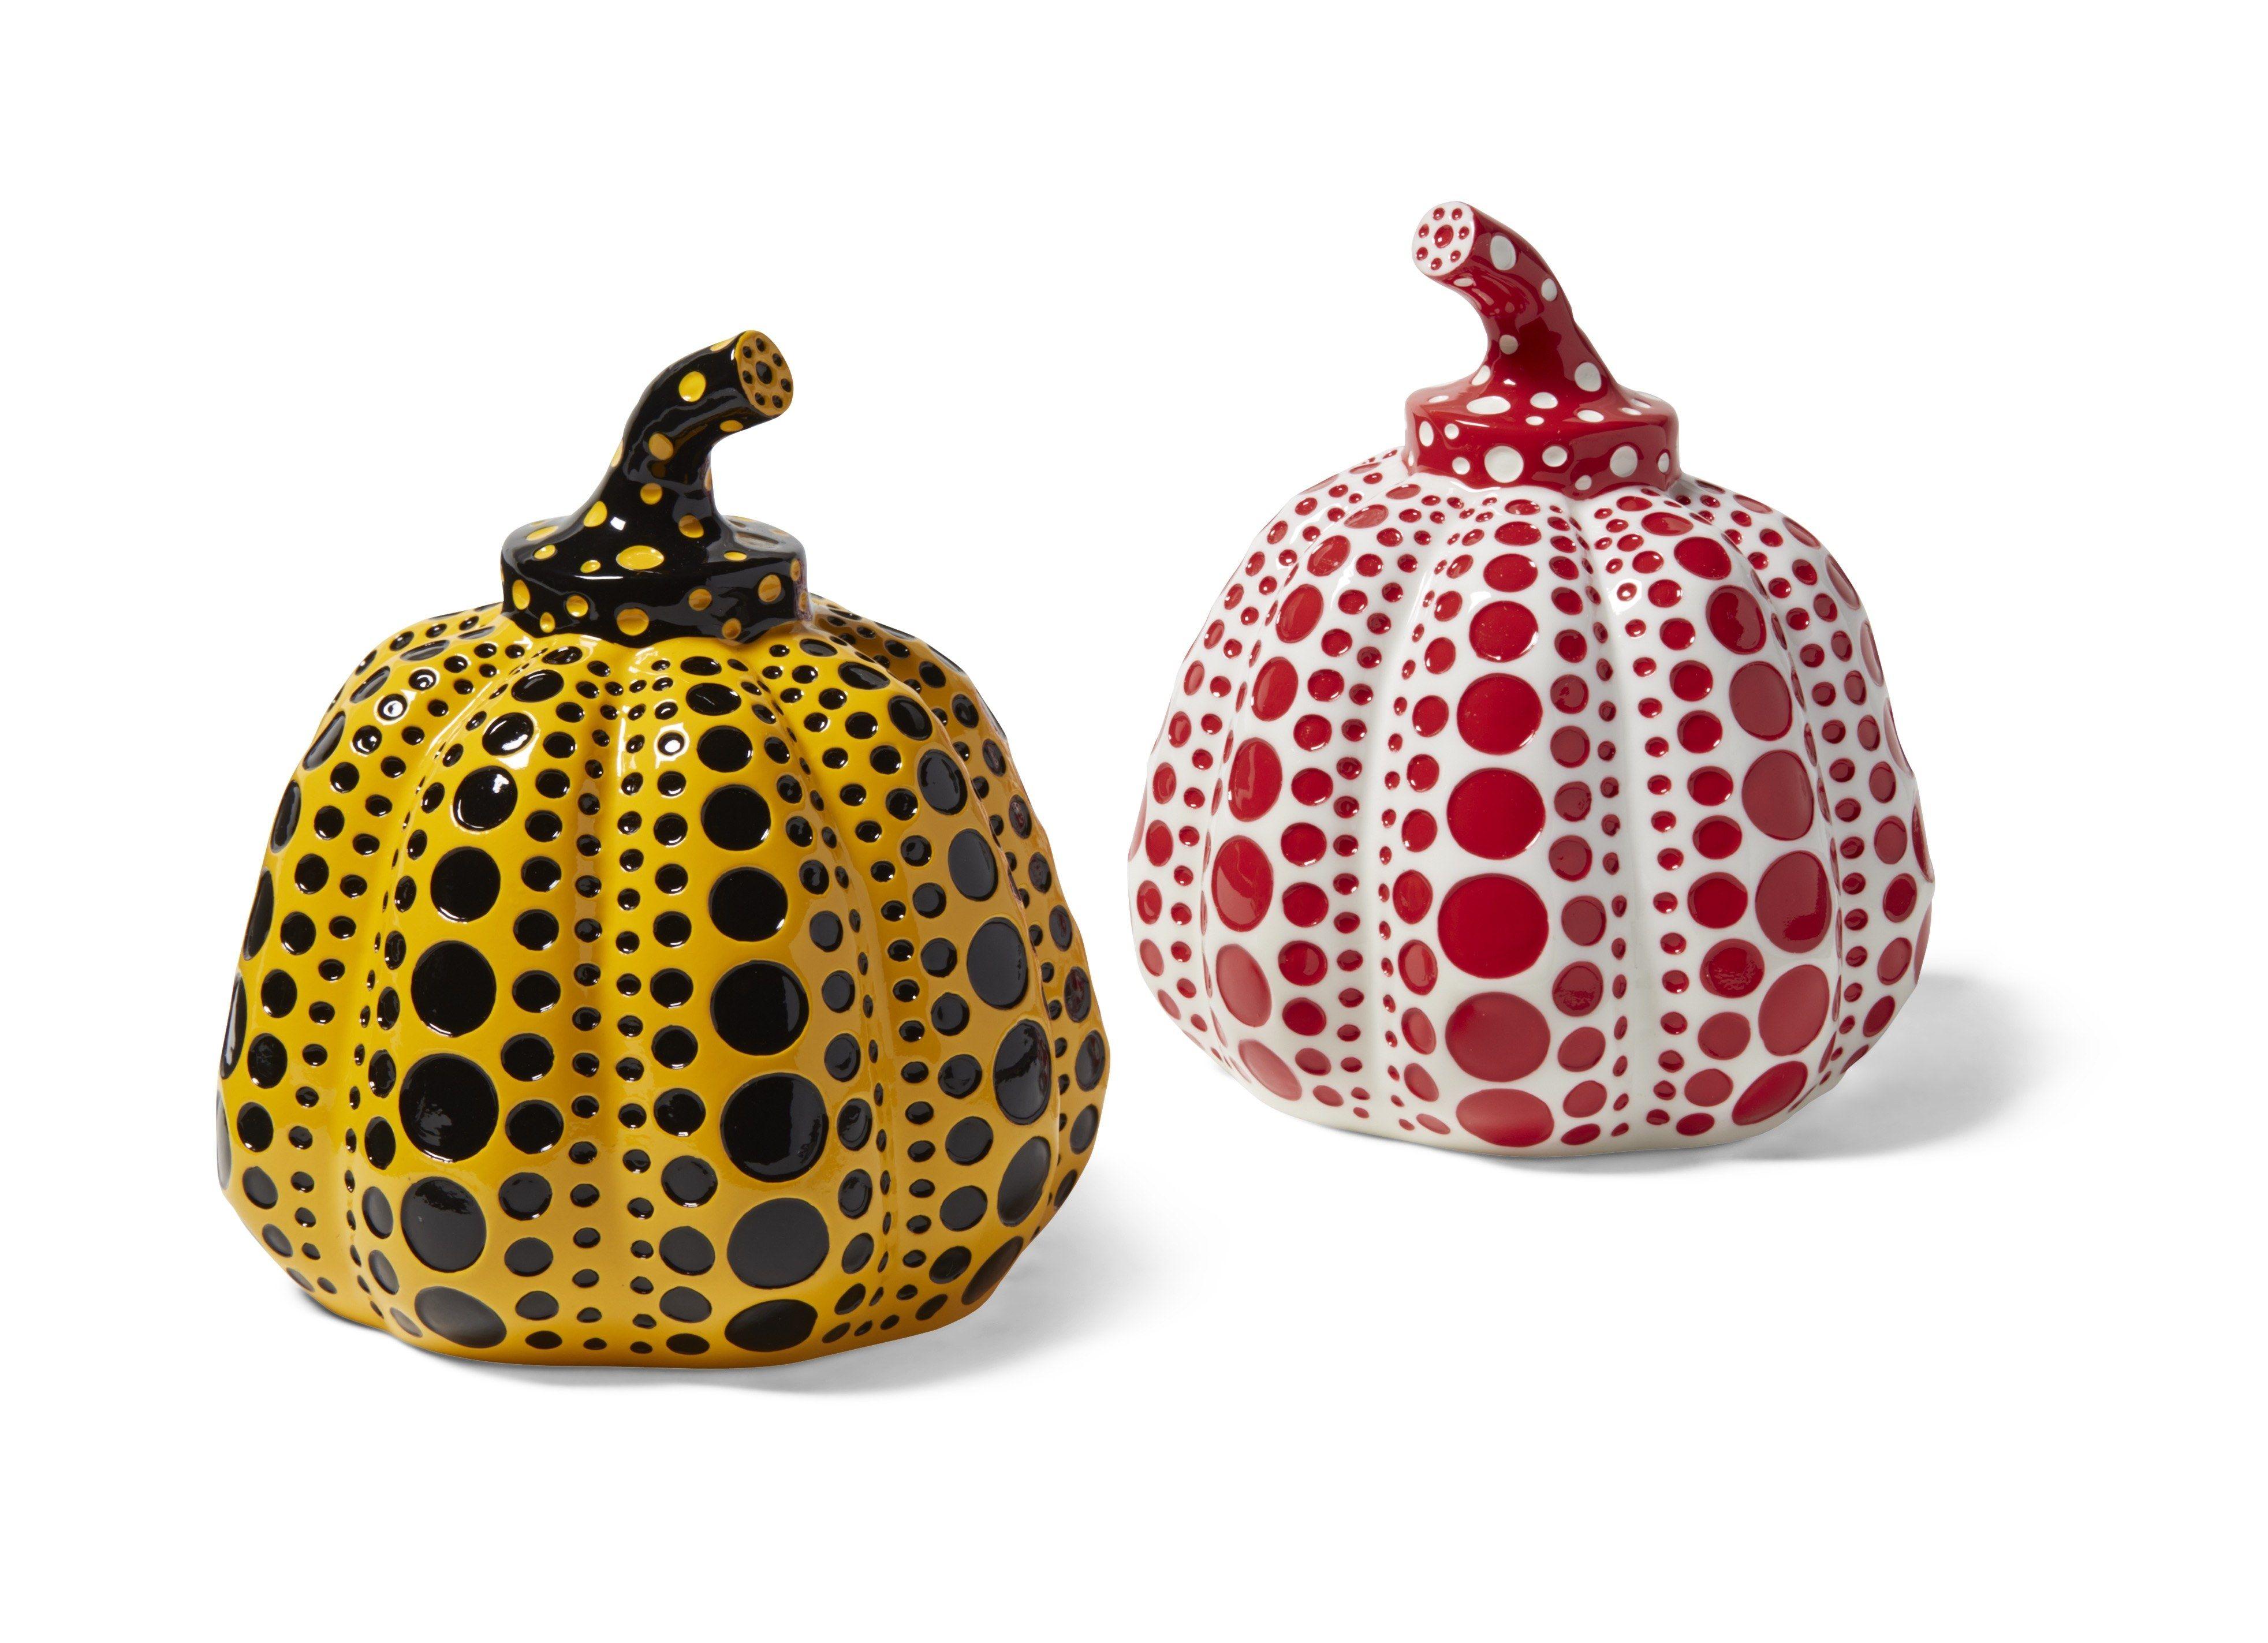 YAYOI KUSAMA                                                              	
Pumpkin Object (White) & Pumpkin Object (Yellow), 2016 
The set of two painted cast resin multiples
Each stamped on the base
Accompanied by the original boxes
Diameter: 7.5